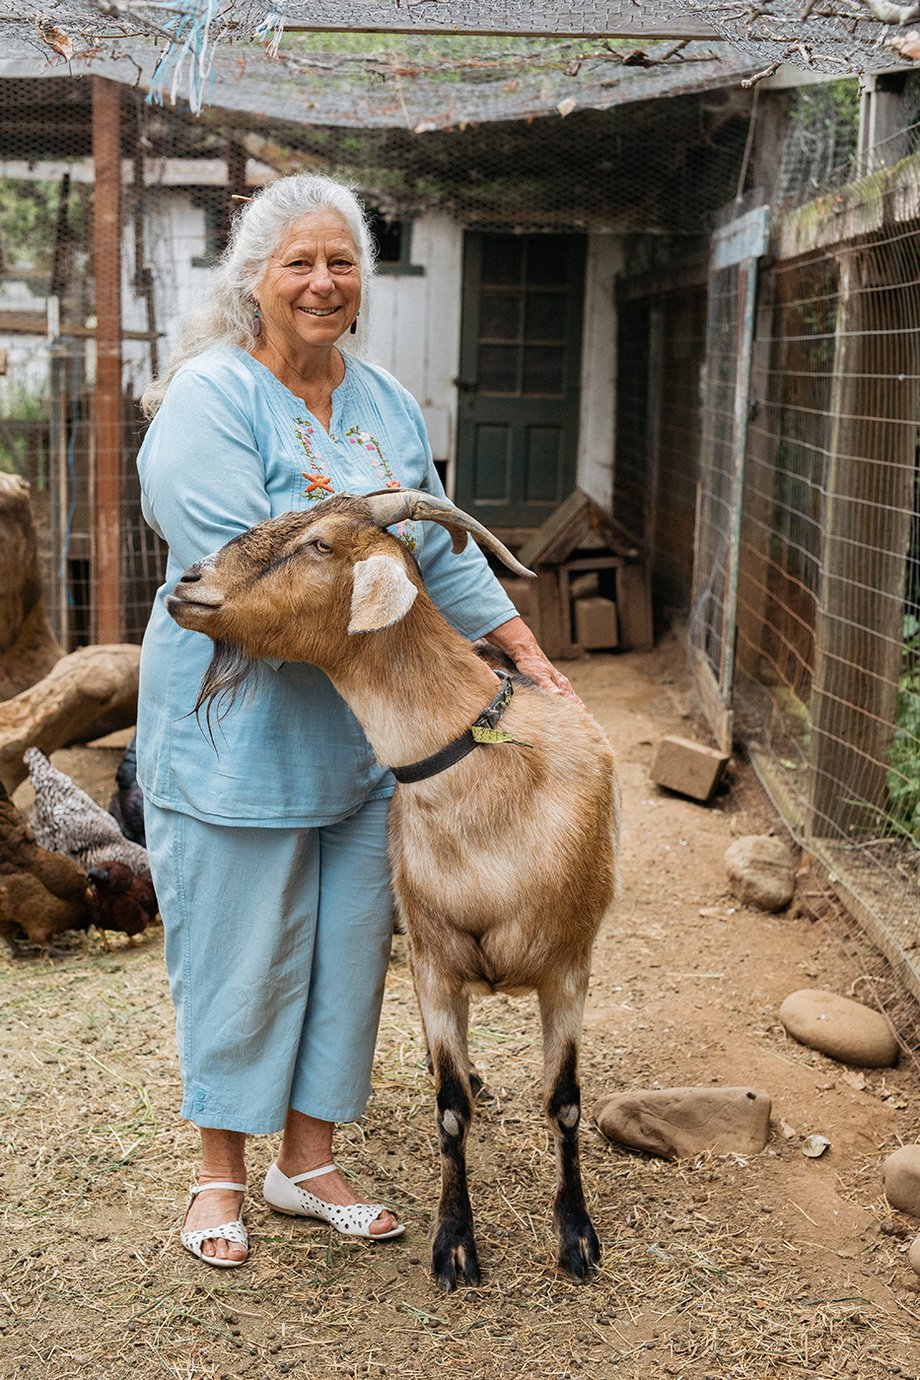 Farmer in Carpinteria, Calif with her goat shot by Mikaela Hamilton for the Women's Heritage Sourcebook.